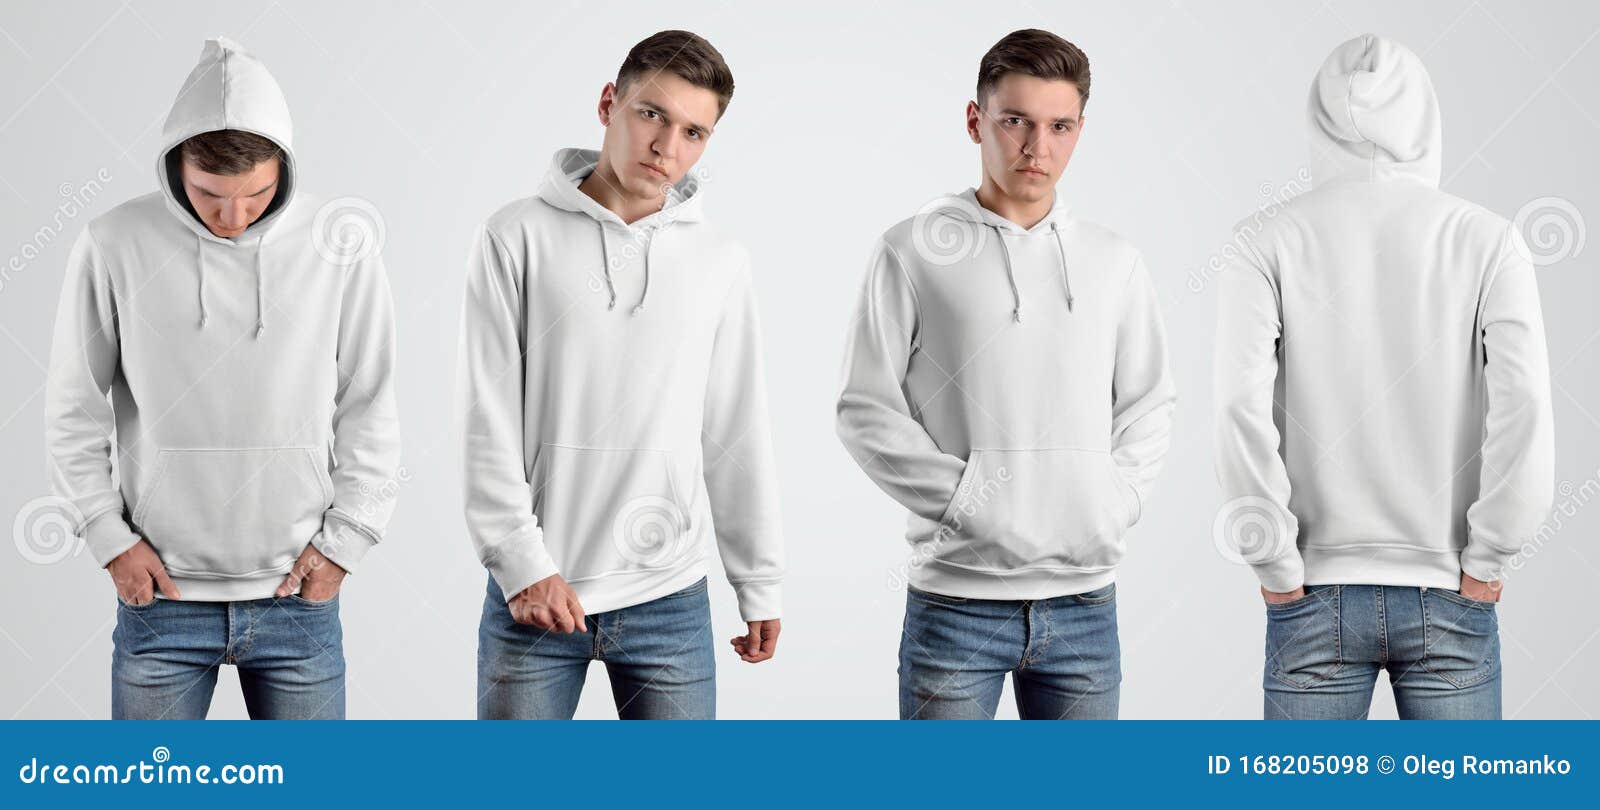 Download Mockup White Hoodie For Online Store Advertising And ...